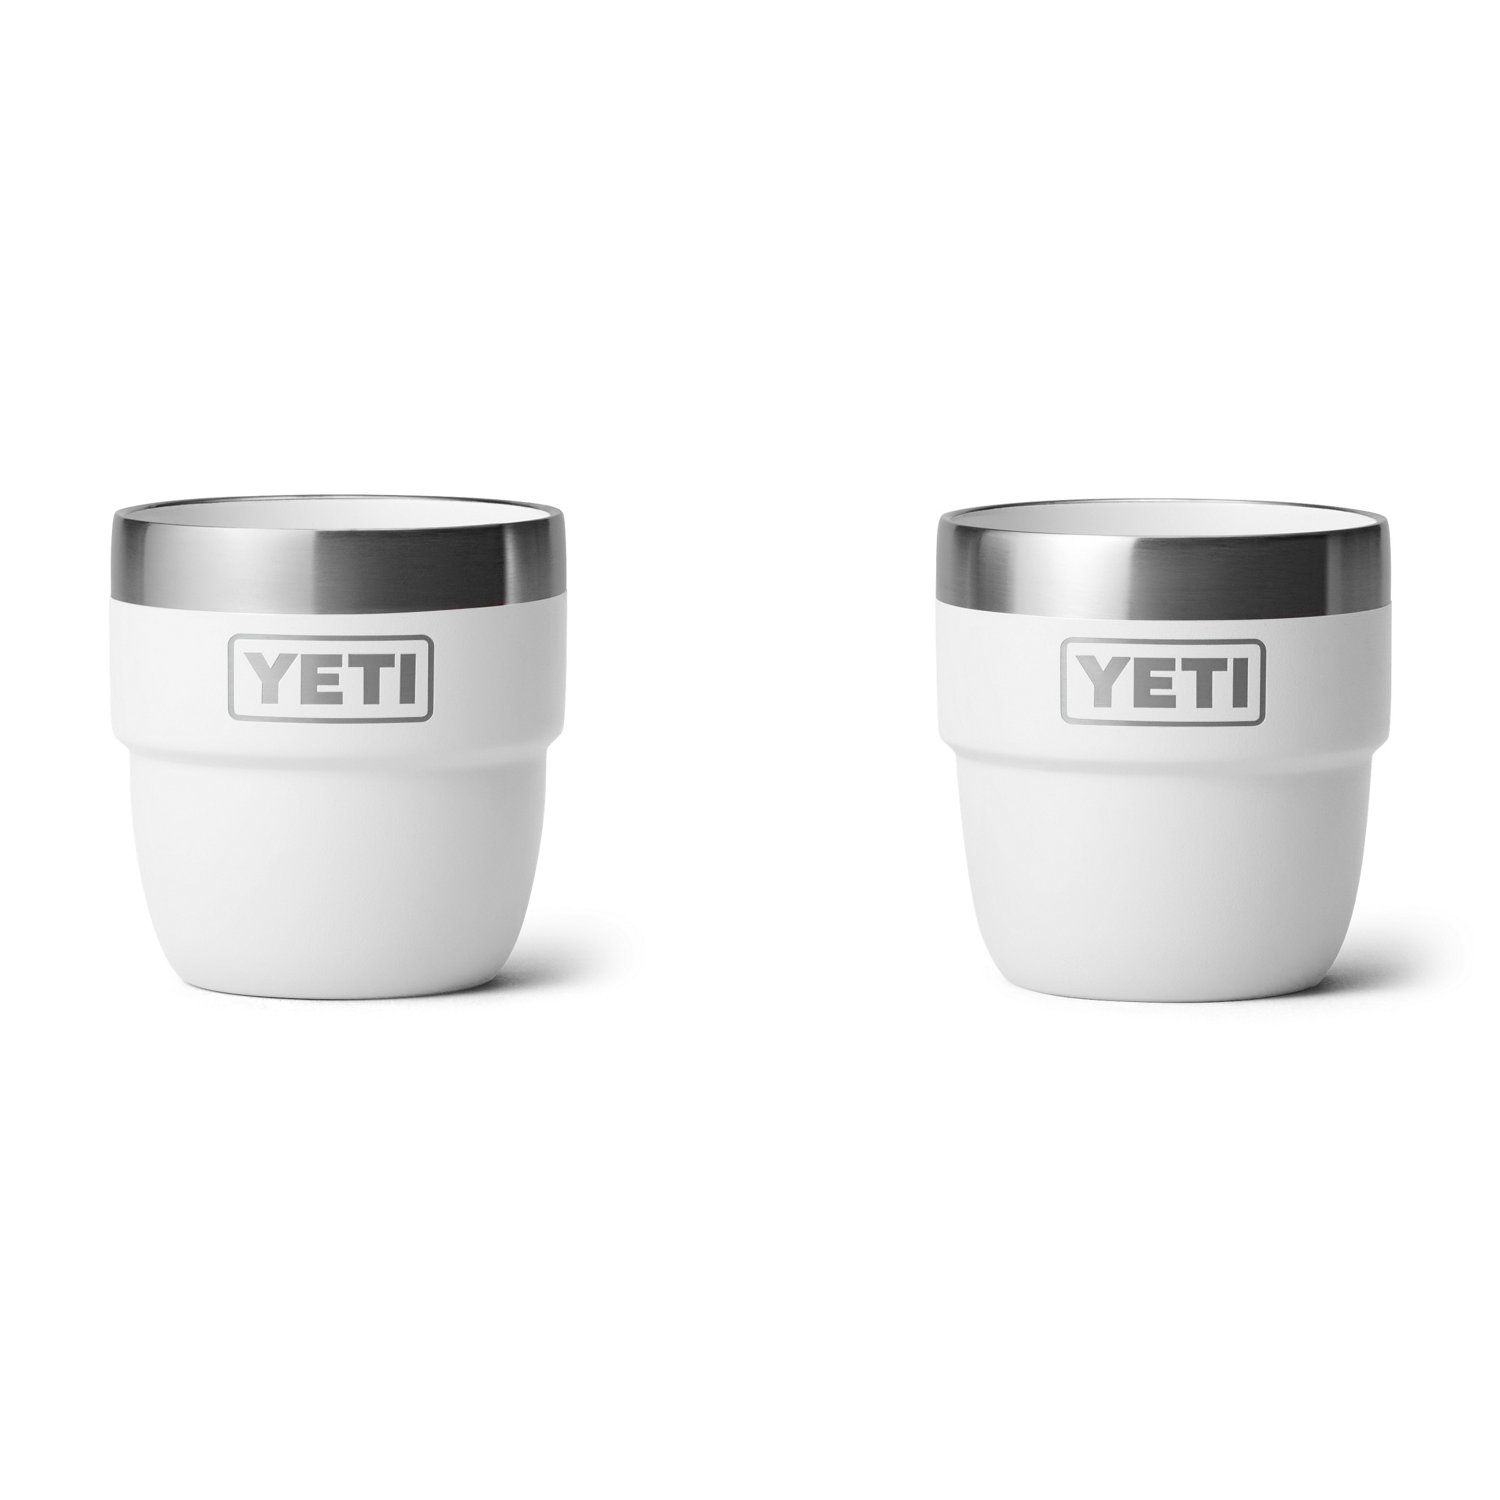 Wood Collection of Skins For Yeti Rambler 16 oz. Stackable Pints (2 Pack)